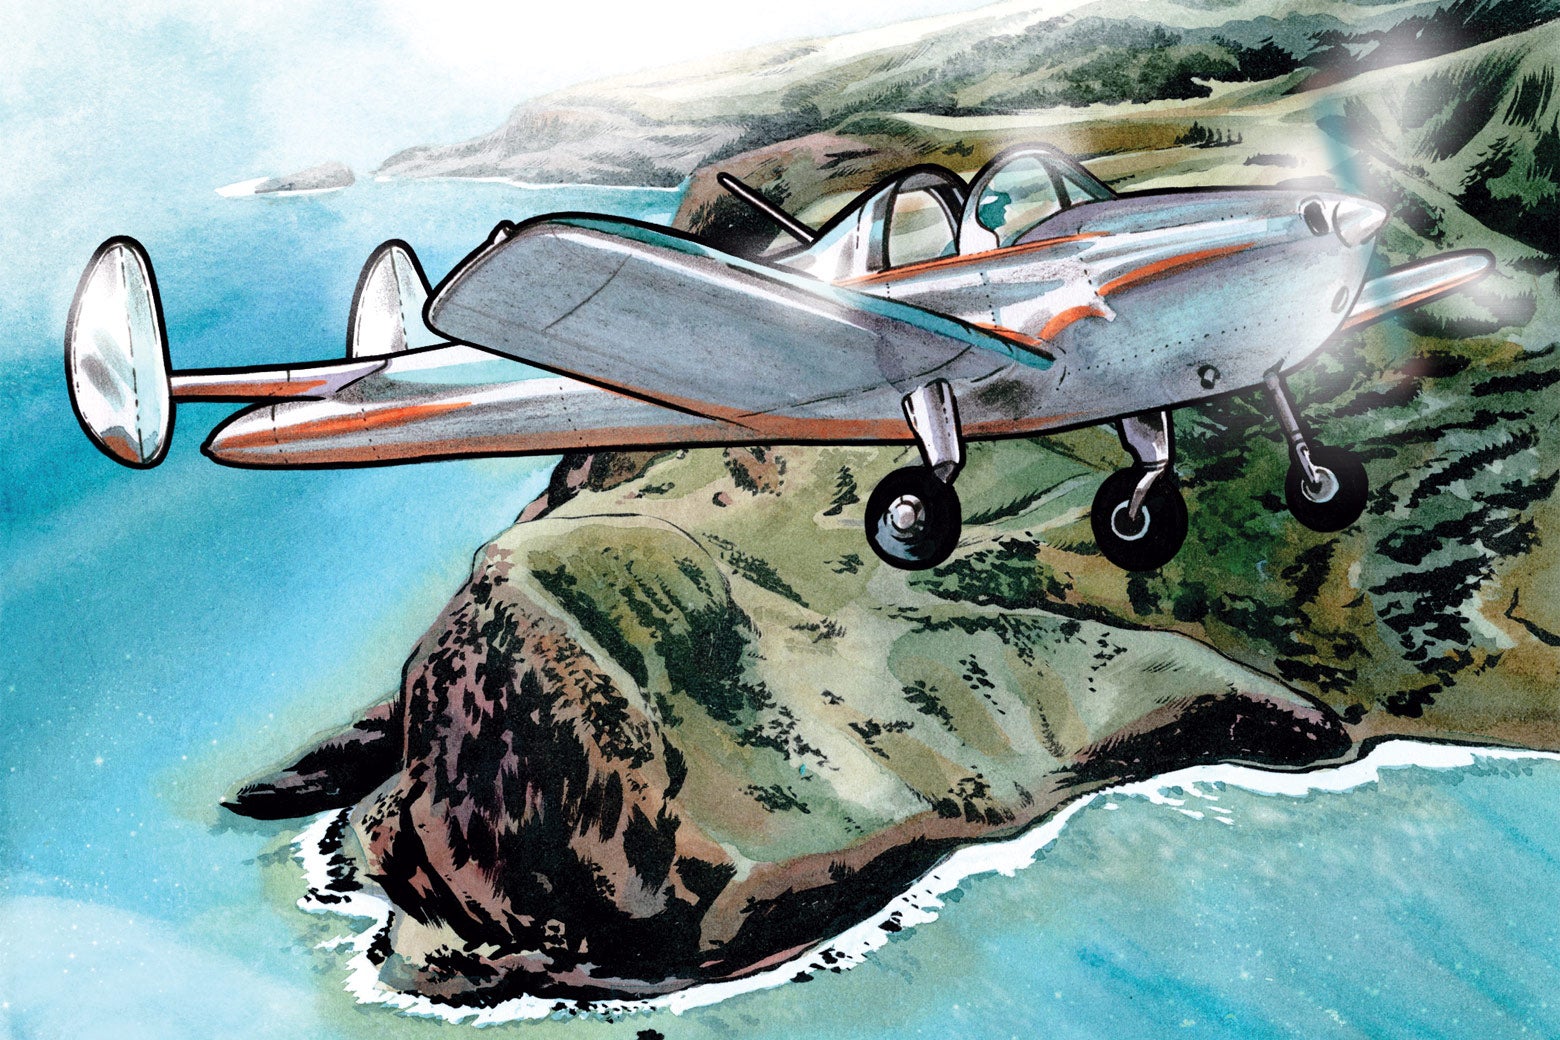 Hawaii Lessons in an Ercoupe